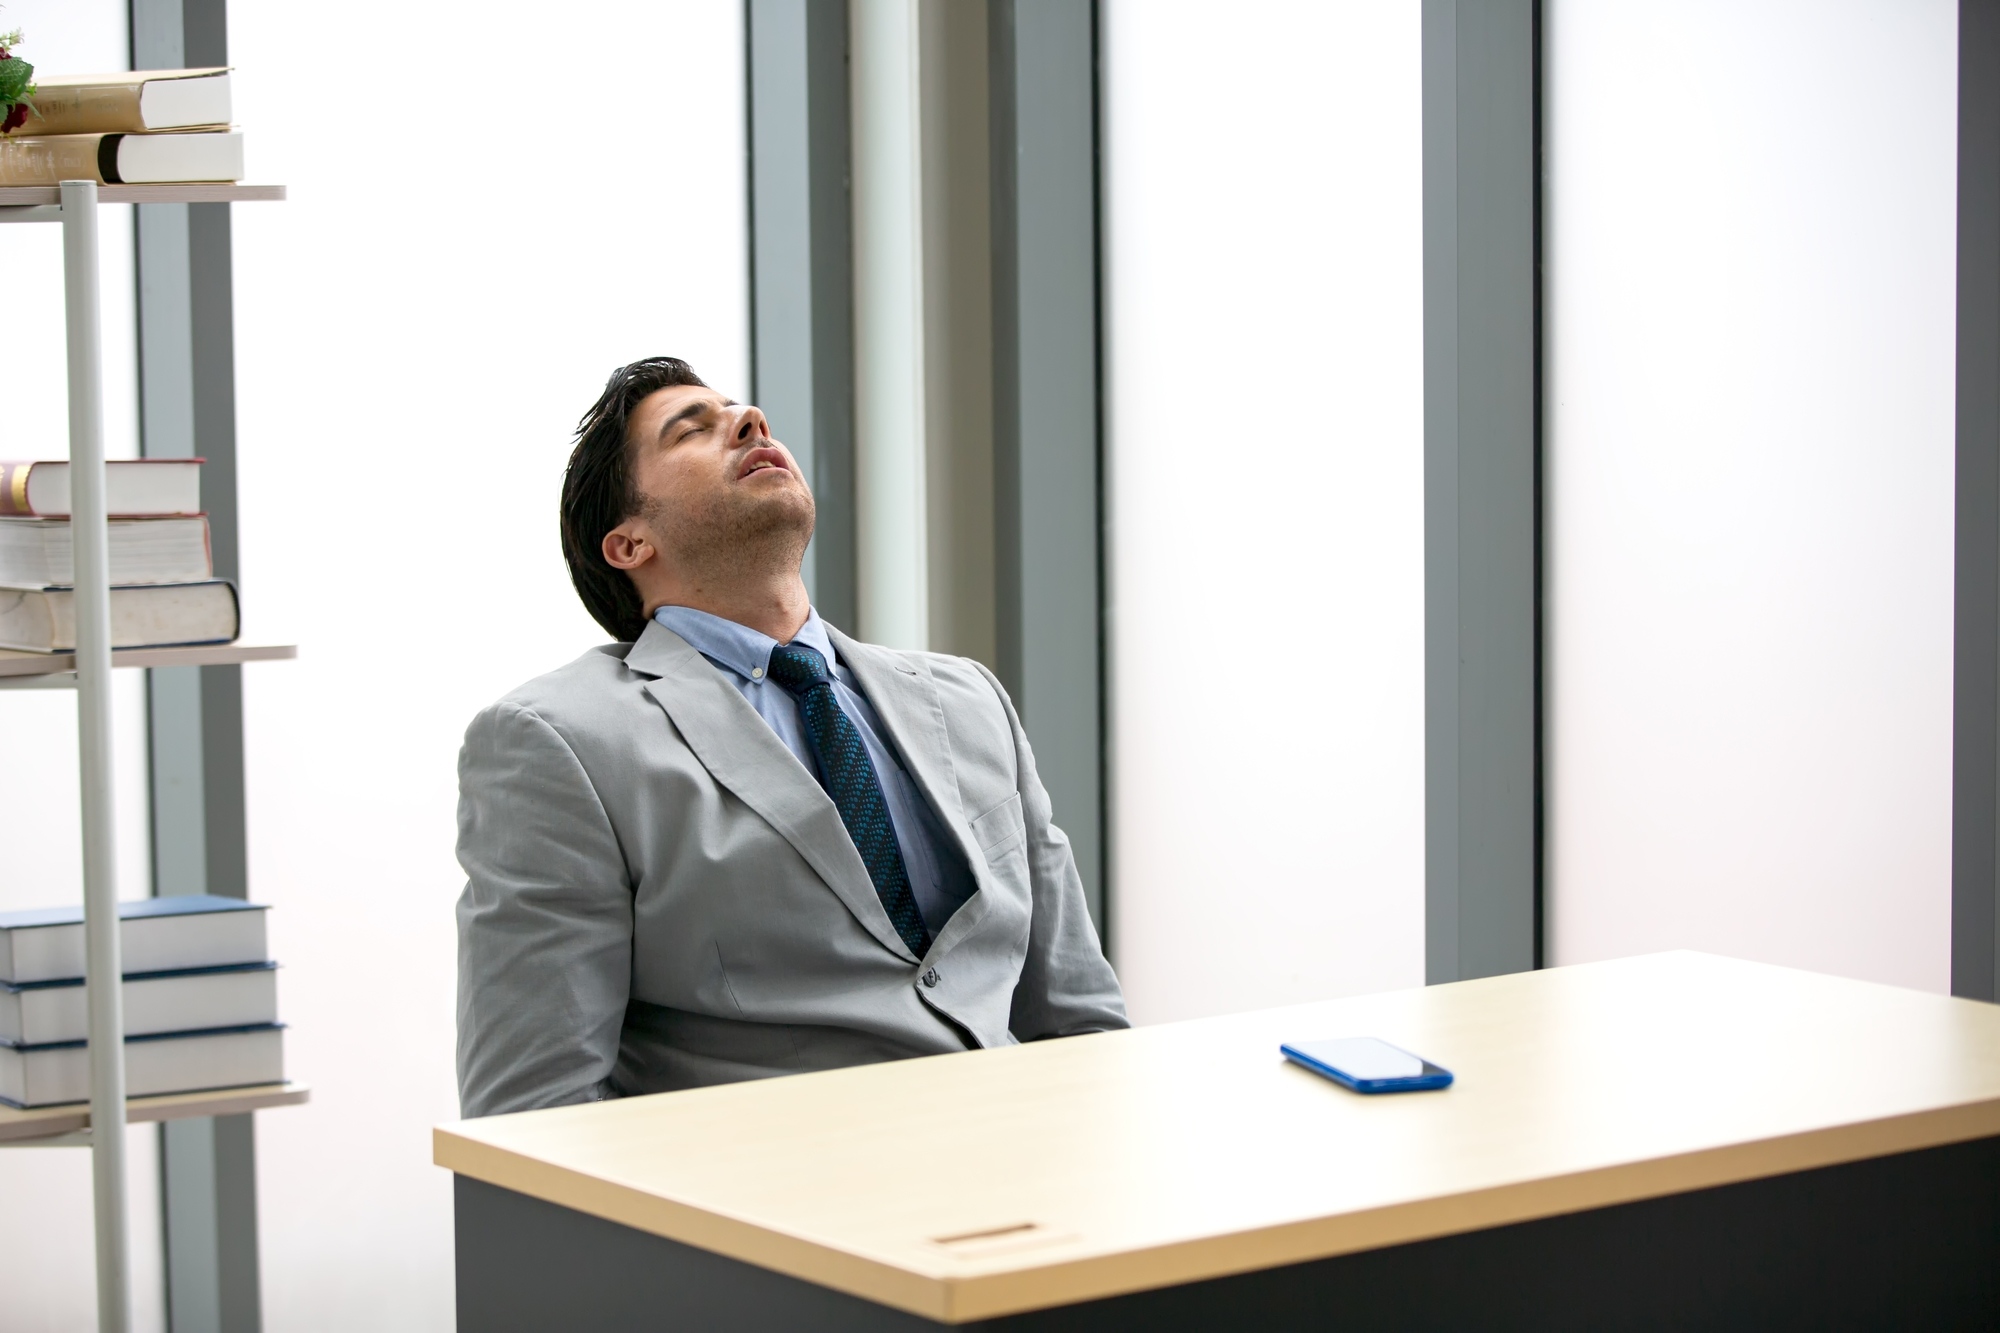 Man in business attire asleep at his desk